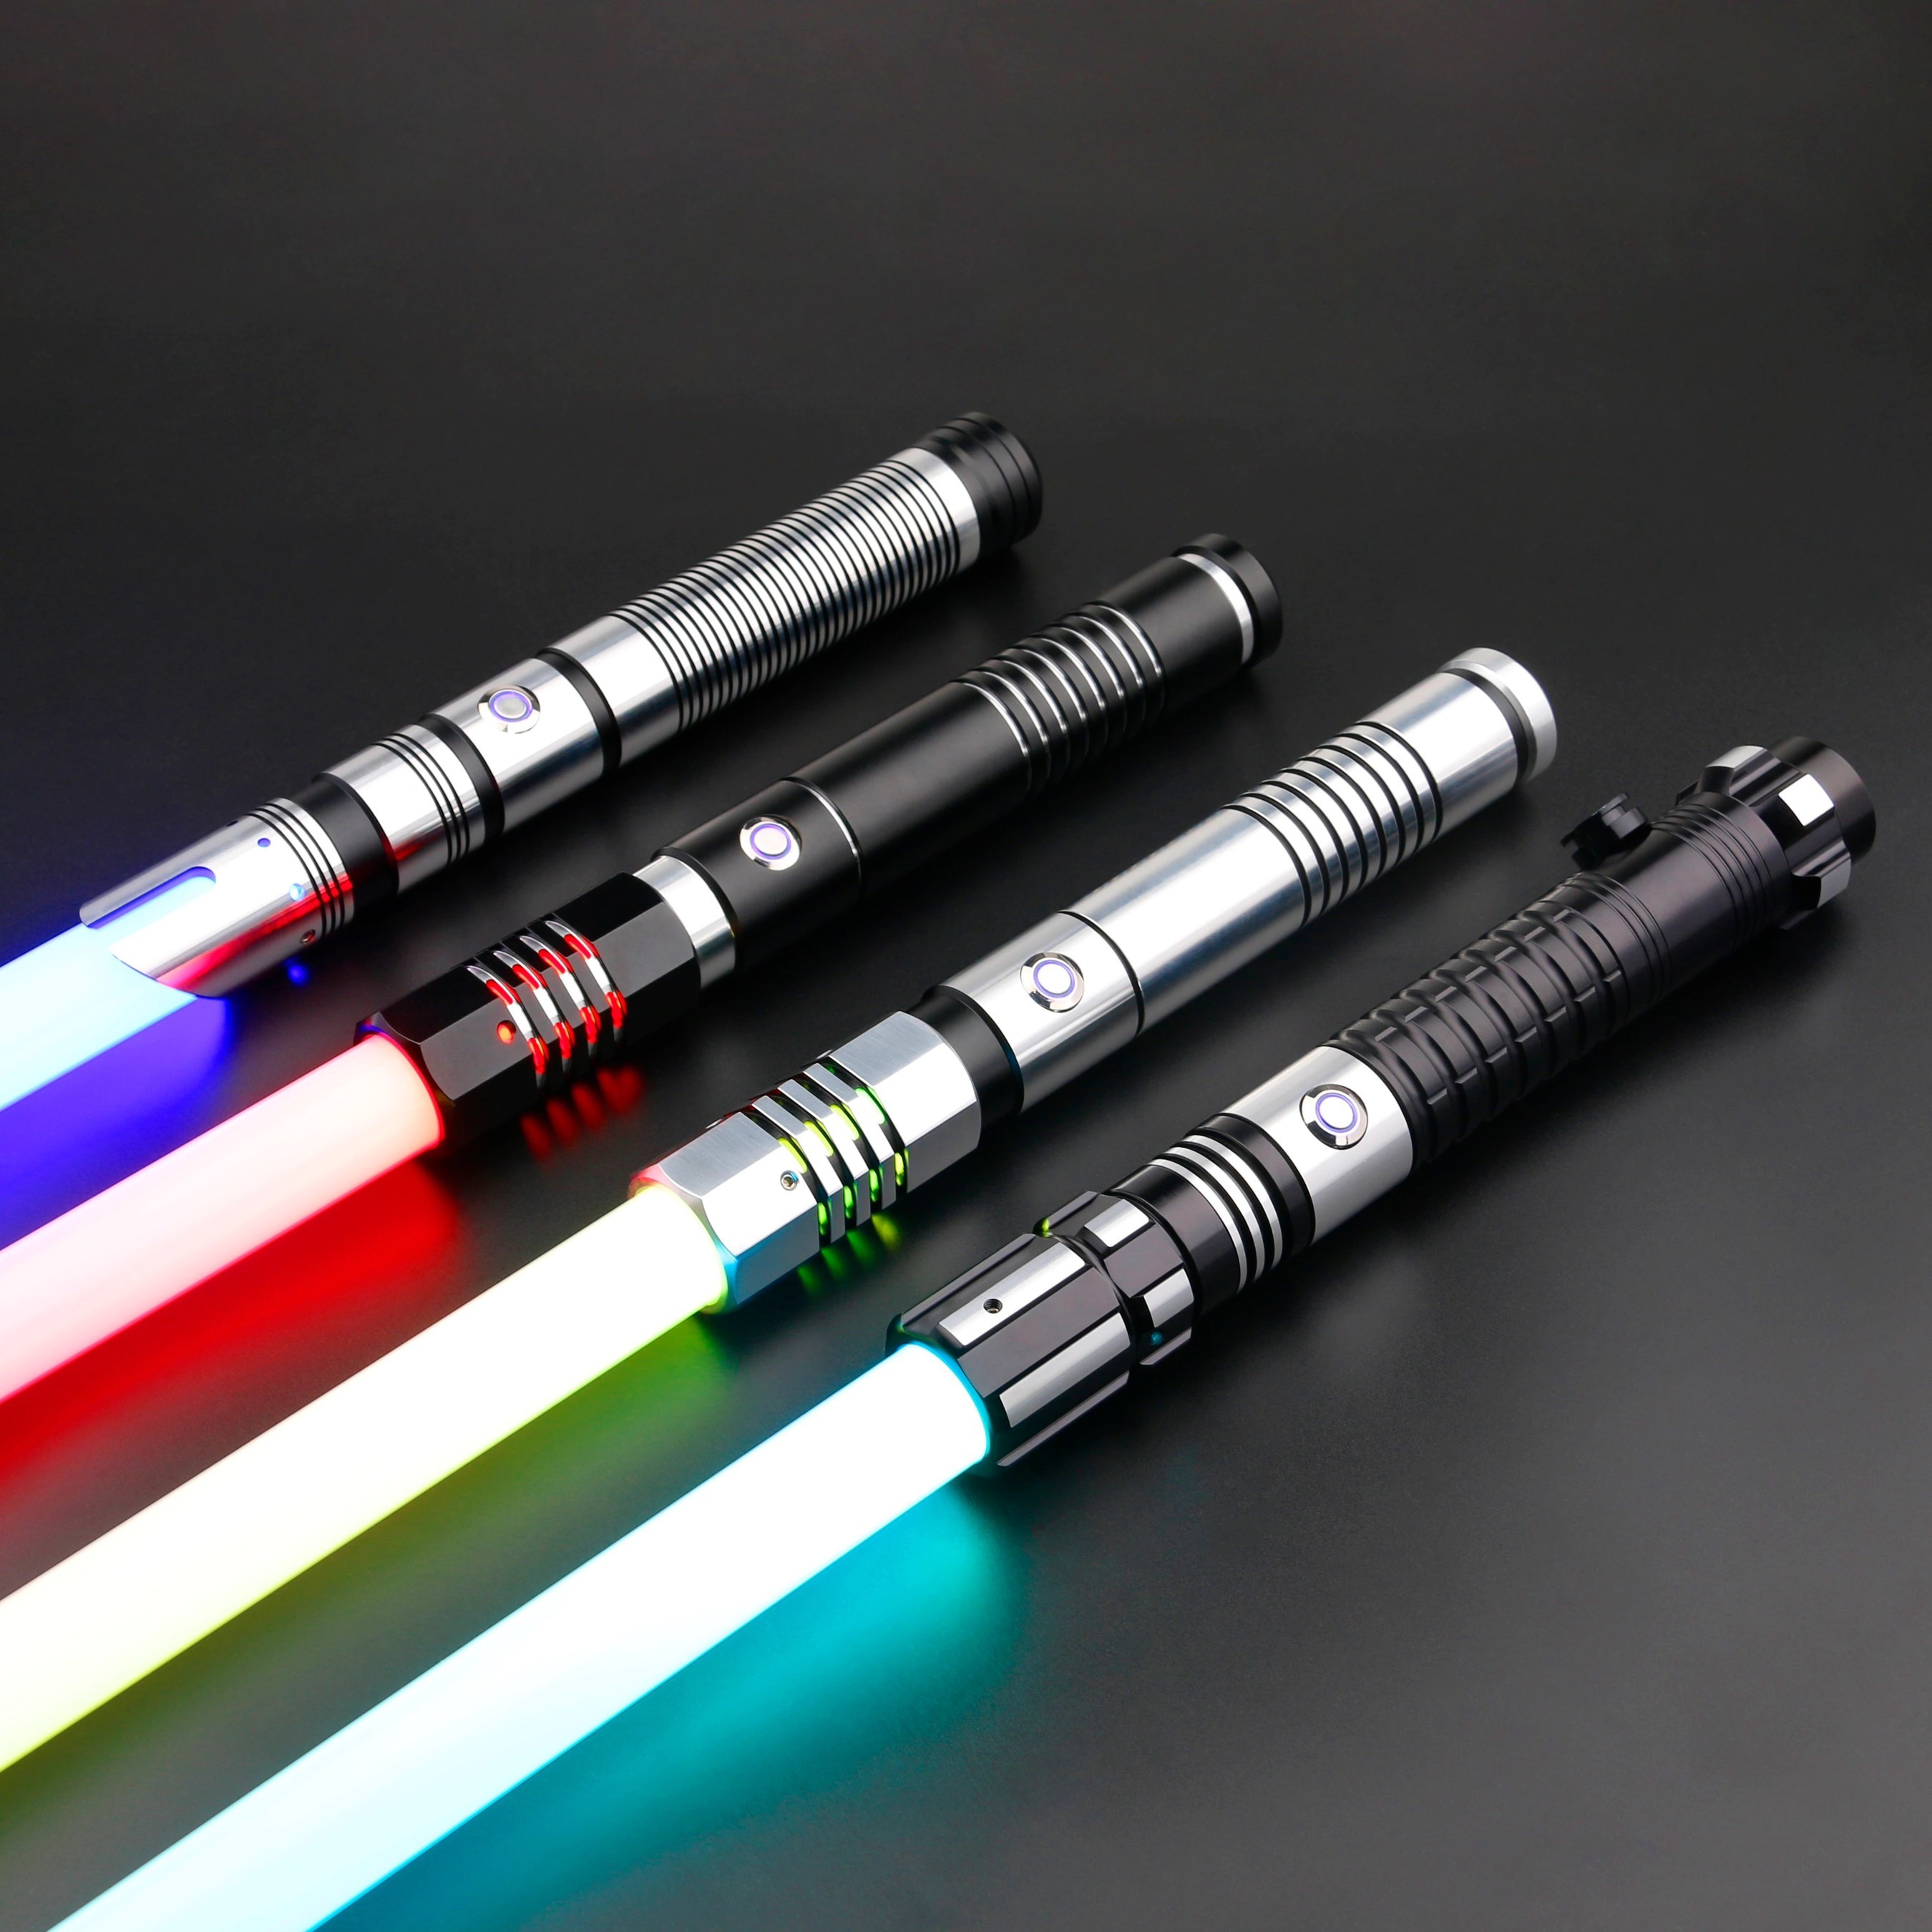 Real Life Lightsabers Are Being Made by DynamicSabers